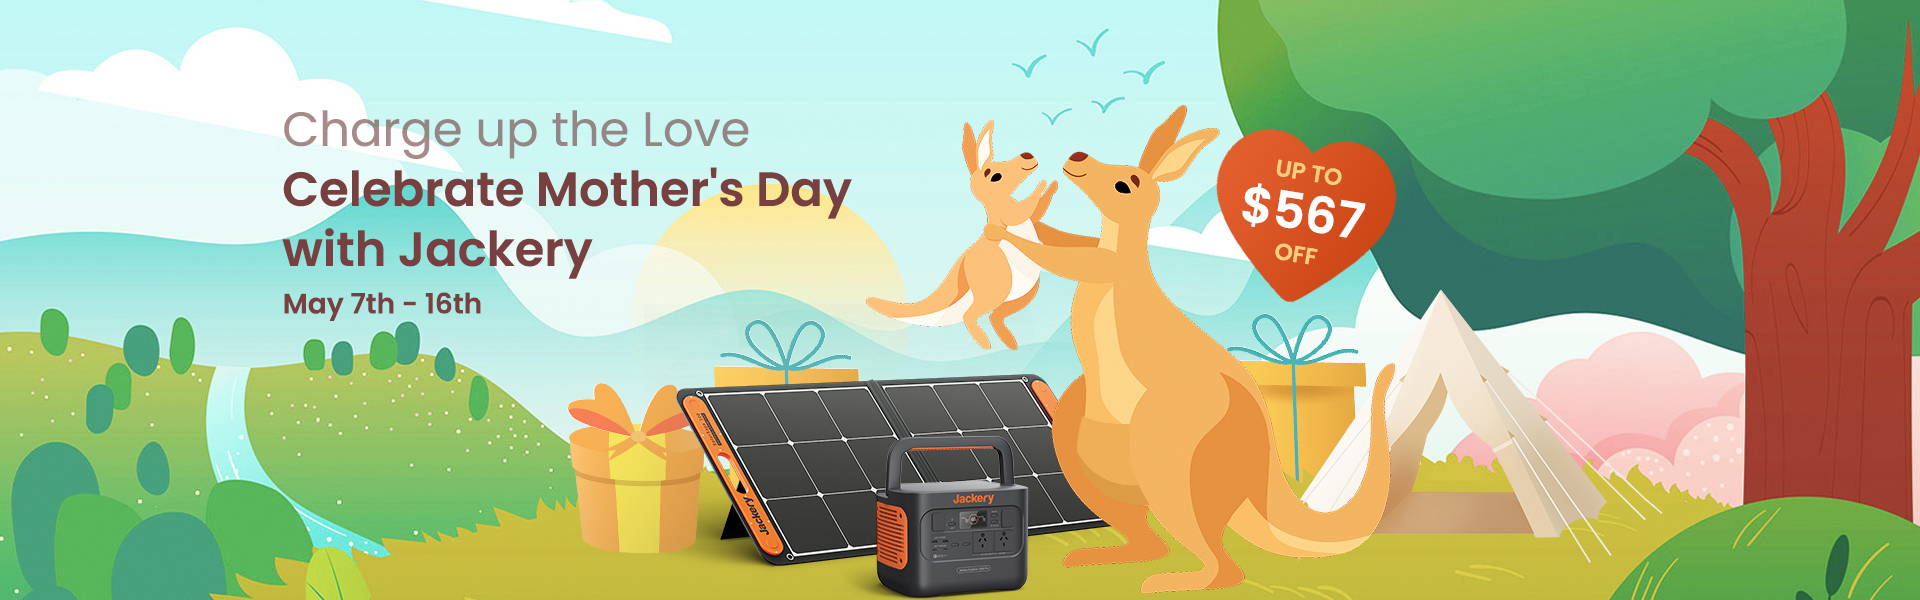 Celebrate Mother's Day with Jackery